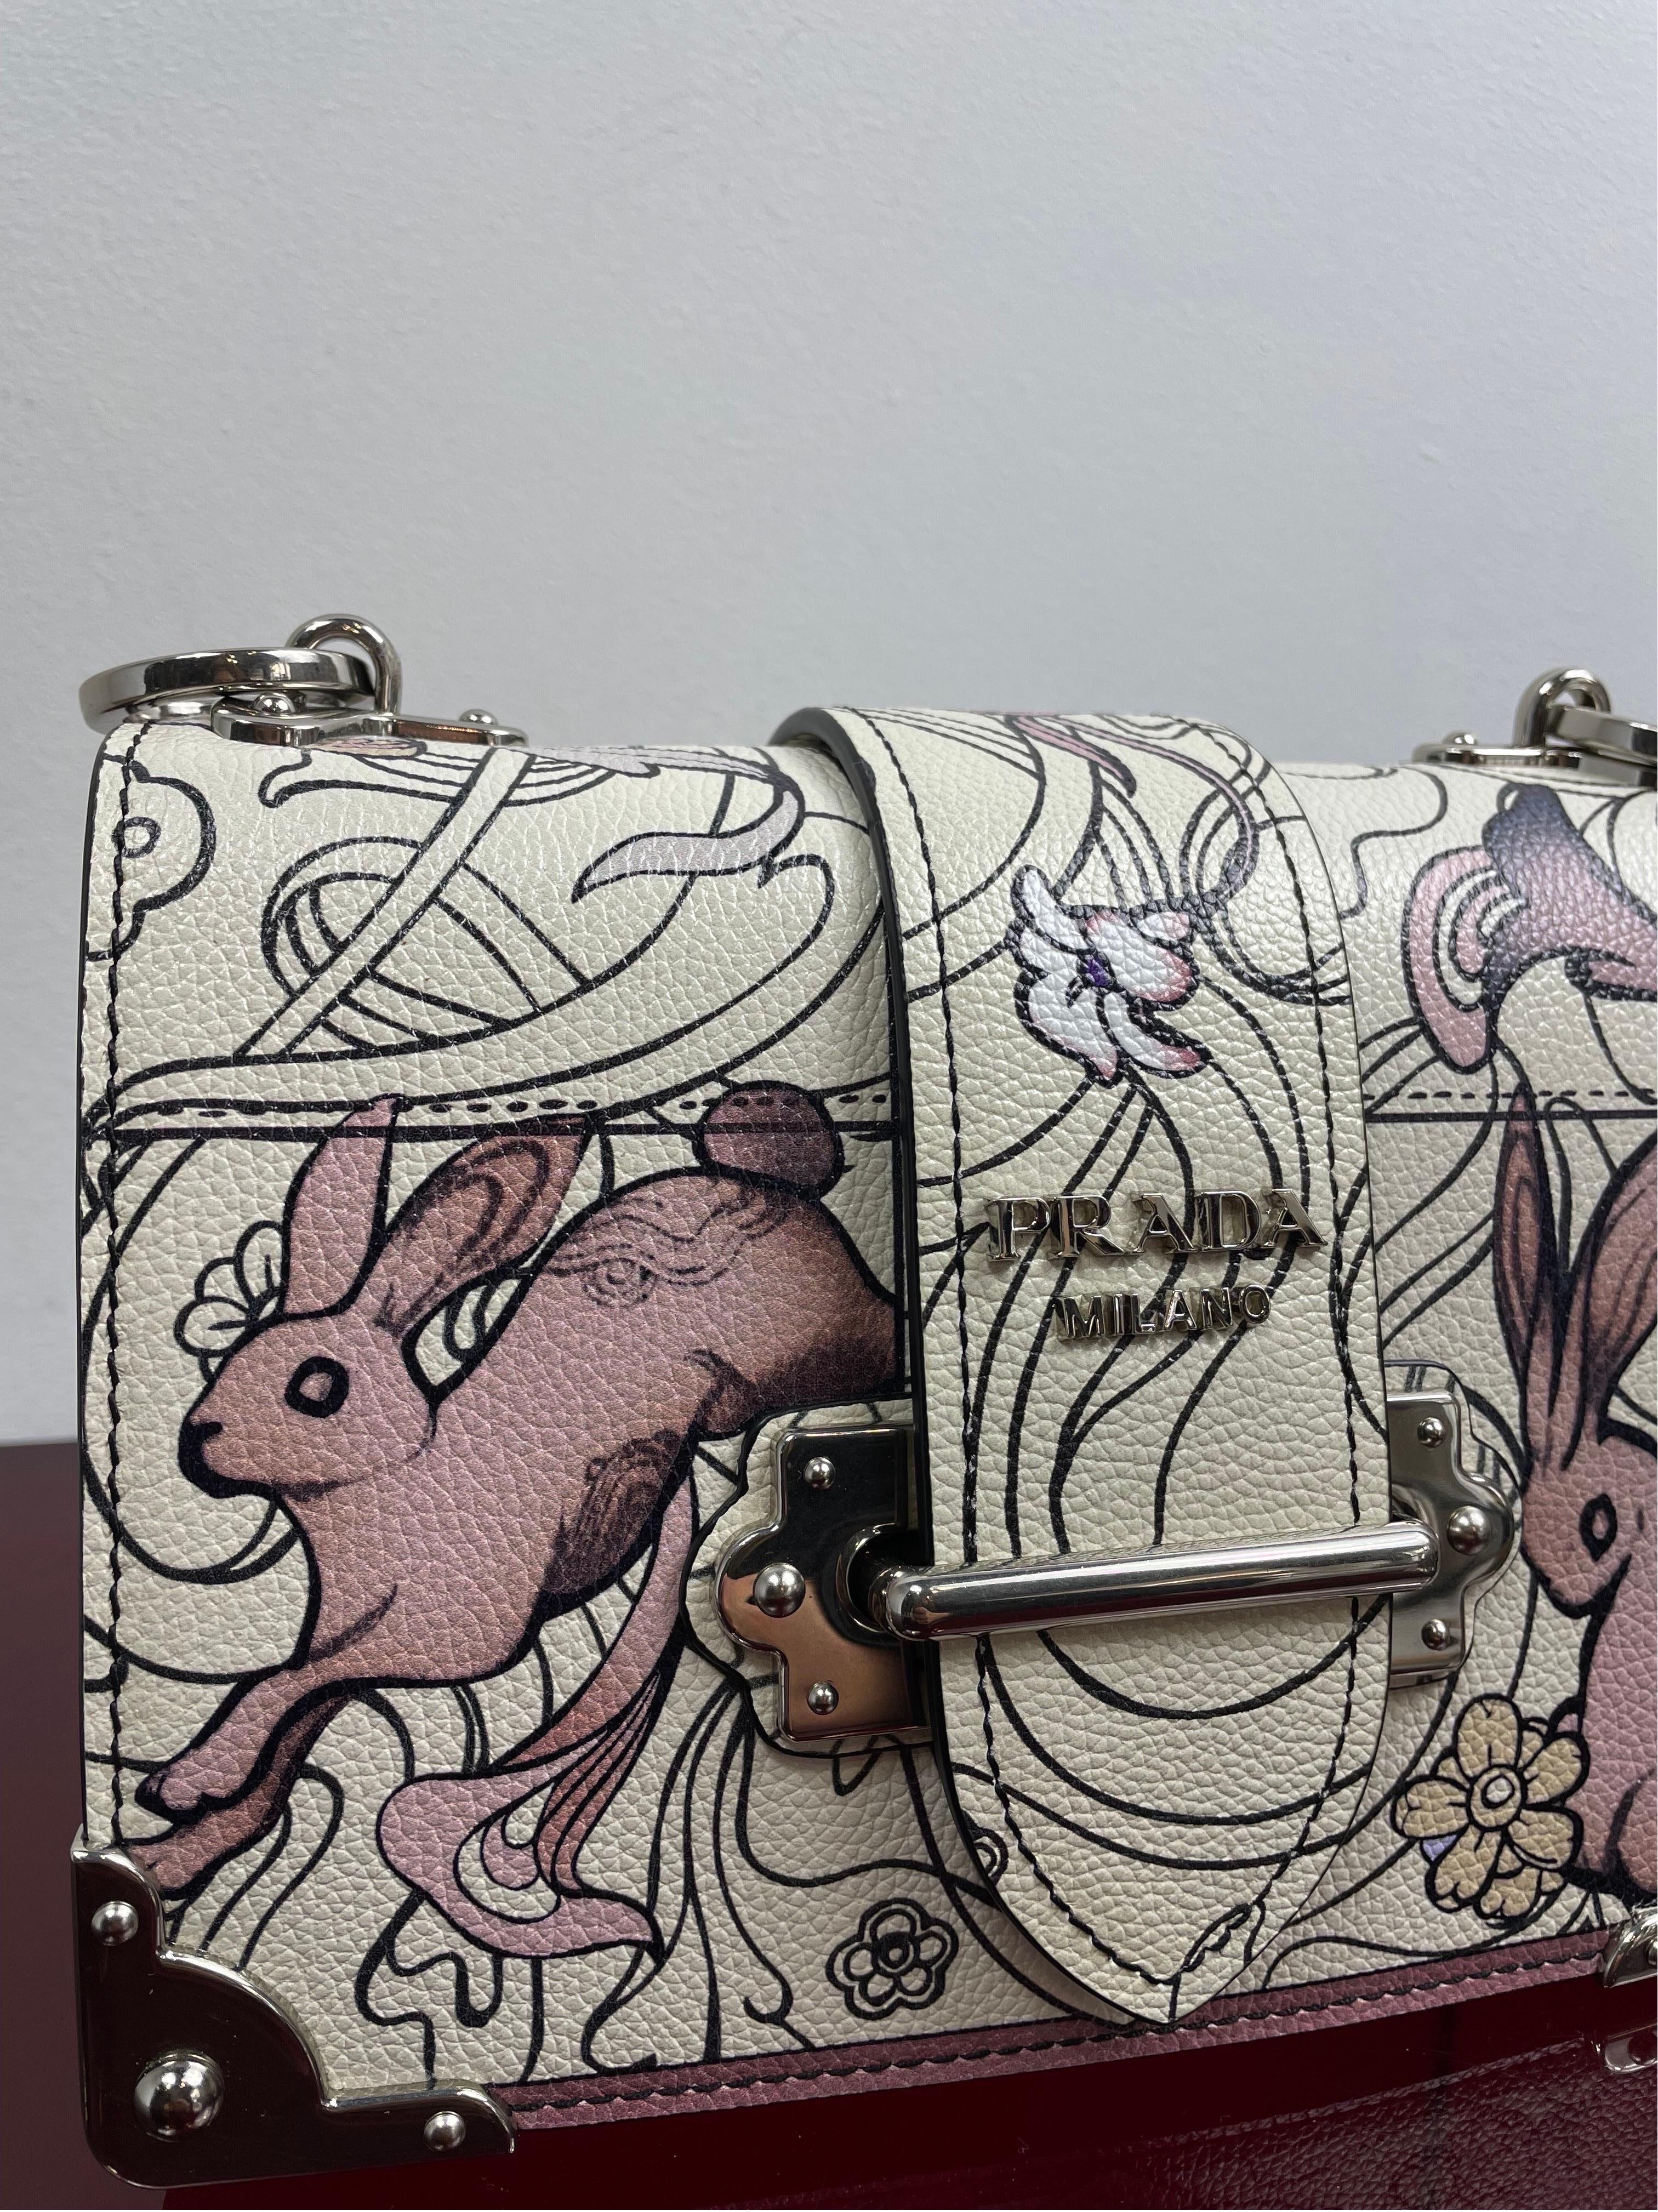 Prada cahier glace Rabbit bag.
Resort 2018 collection.
Featuring James Jean artist.
Shoulder strap is removable. 
Height 14 cm
Width 20 cm 
Depth 10 cm
Shoulder strap 40 cm 
It comes with original dust bag.
Conditions: very good - it was rarely used